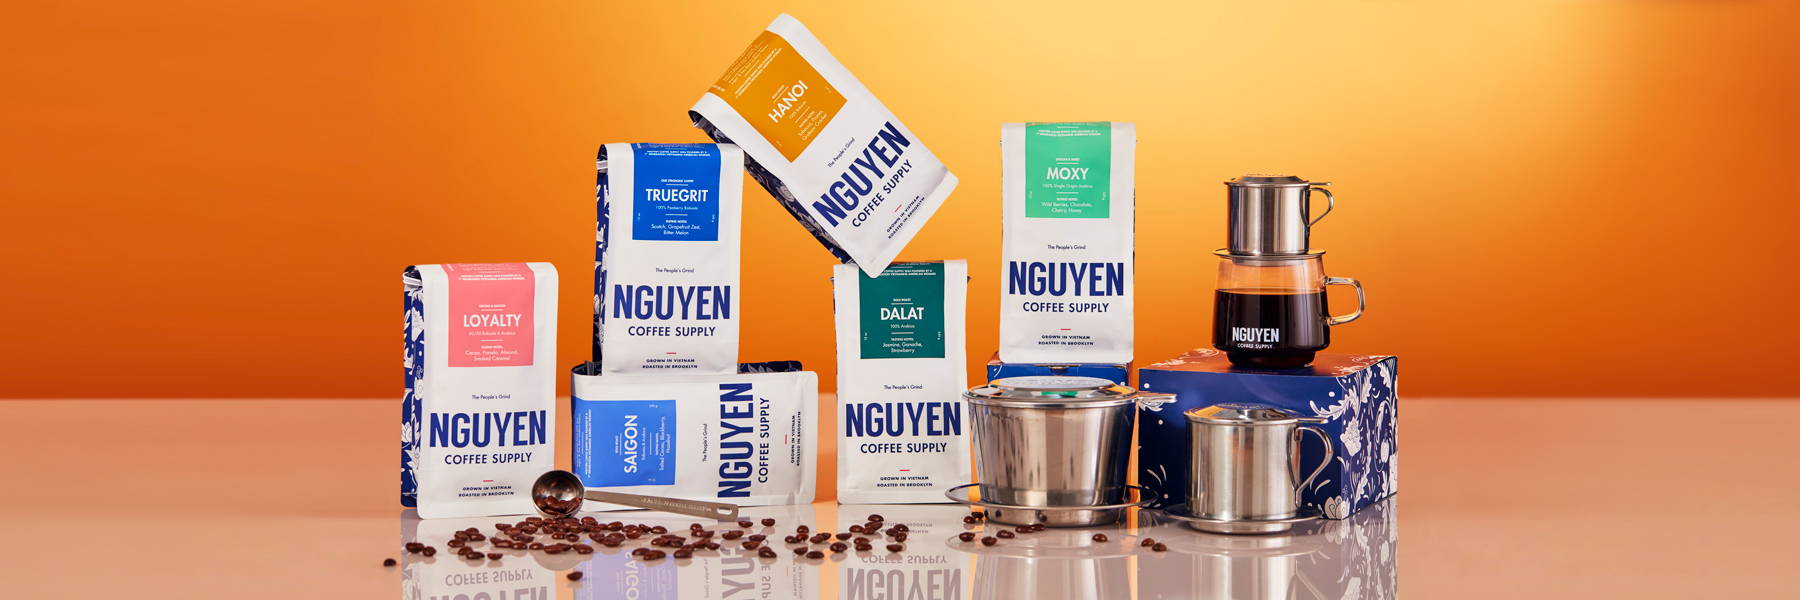 Try the Nguyen Coffee Supply D...